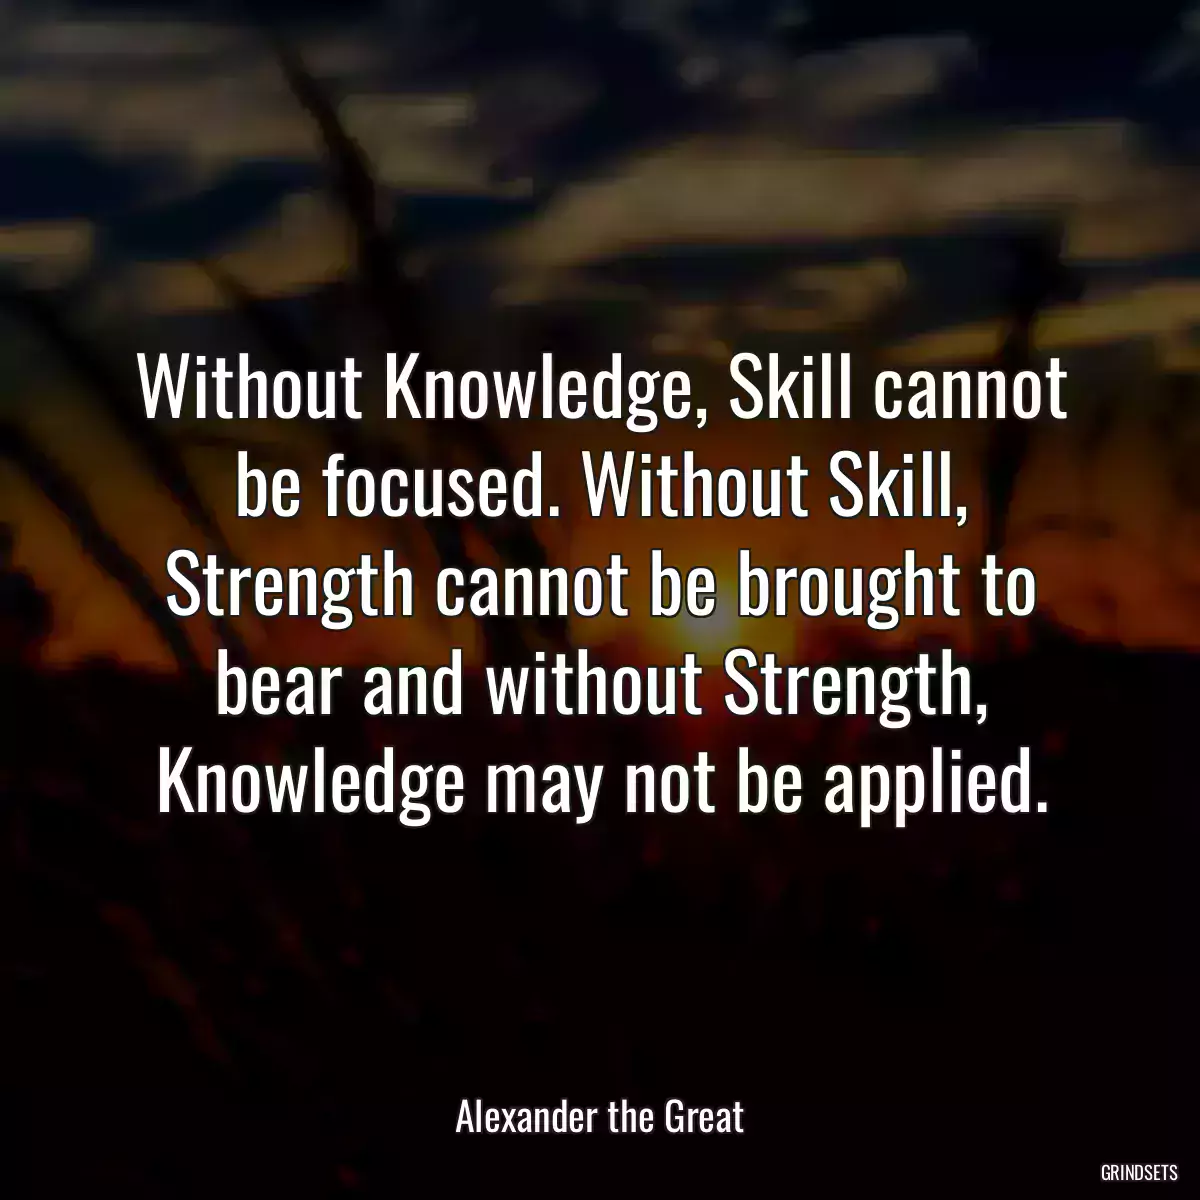 Without Knowledge, Skill cannot be focused. Without Skill, Strength cannot be brought to bear and without Strength, Knowledge may not be applied.